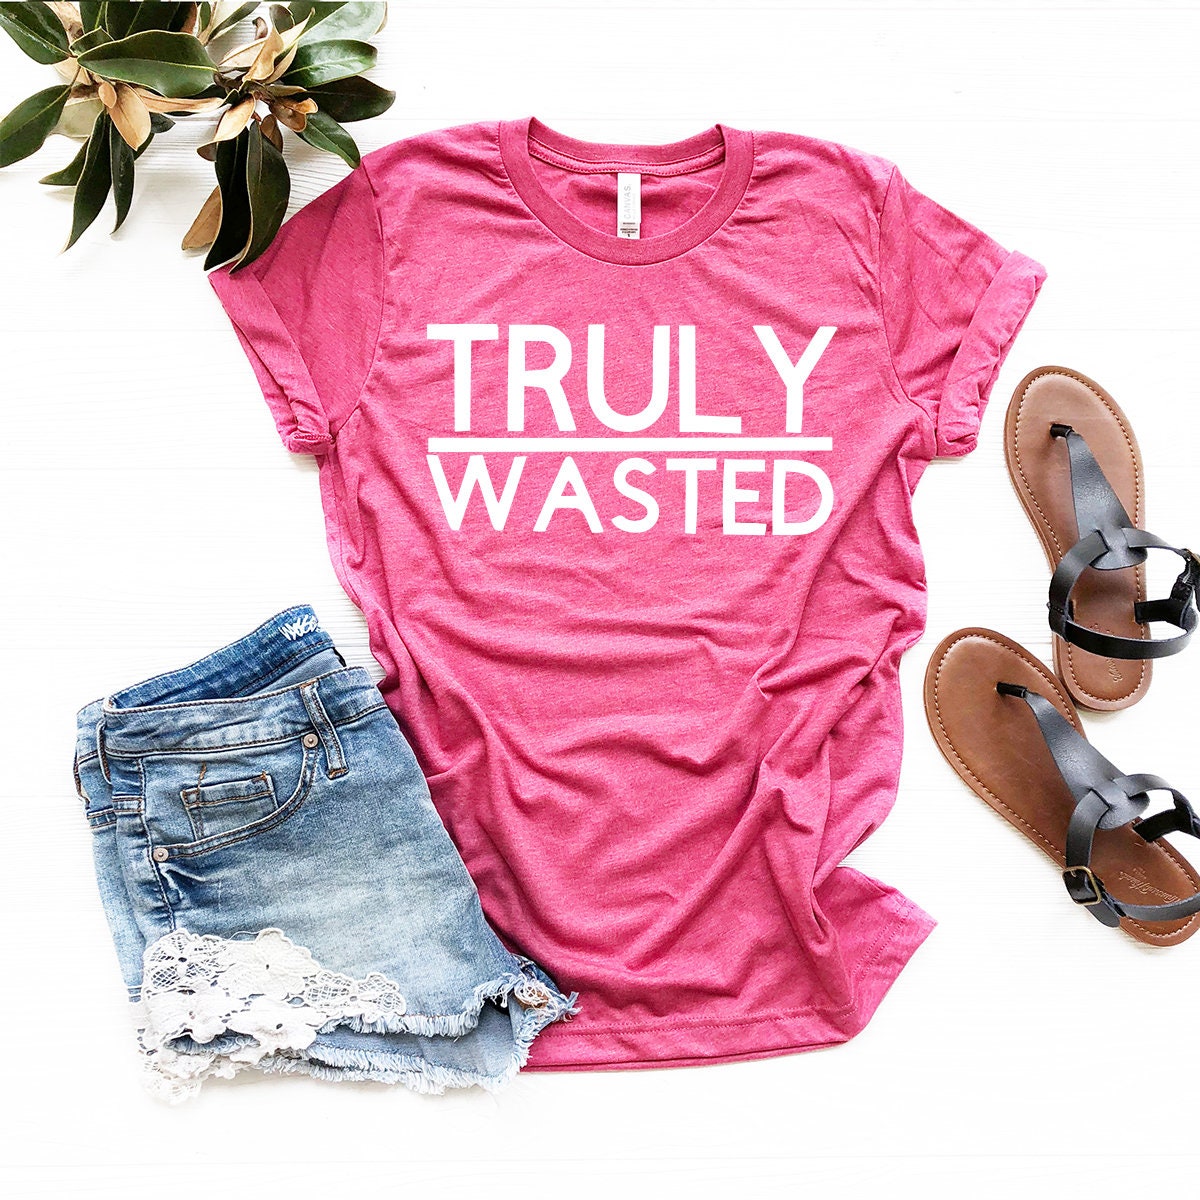 Truly Wasted T-Shirt, Alcoholic Shirt, Drink Alcohol Shirt, Drunk Shirt, Funny Alcohol Shirt, Gift For Alcohol, Drinking Shirt, Drunk Tee - Fastdeliverytees.com